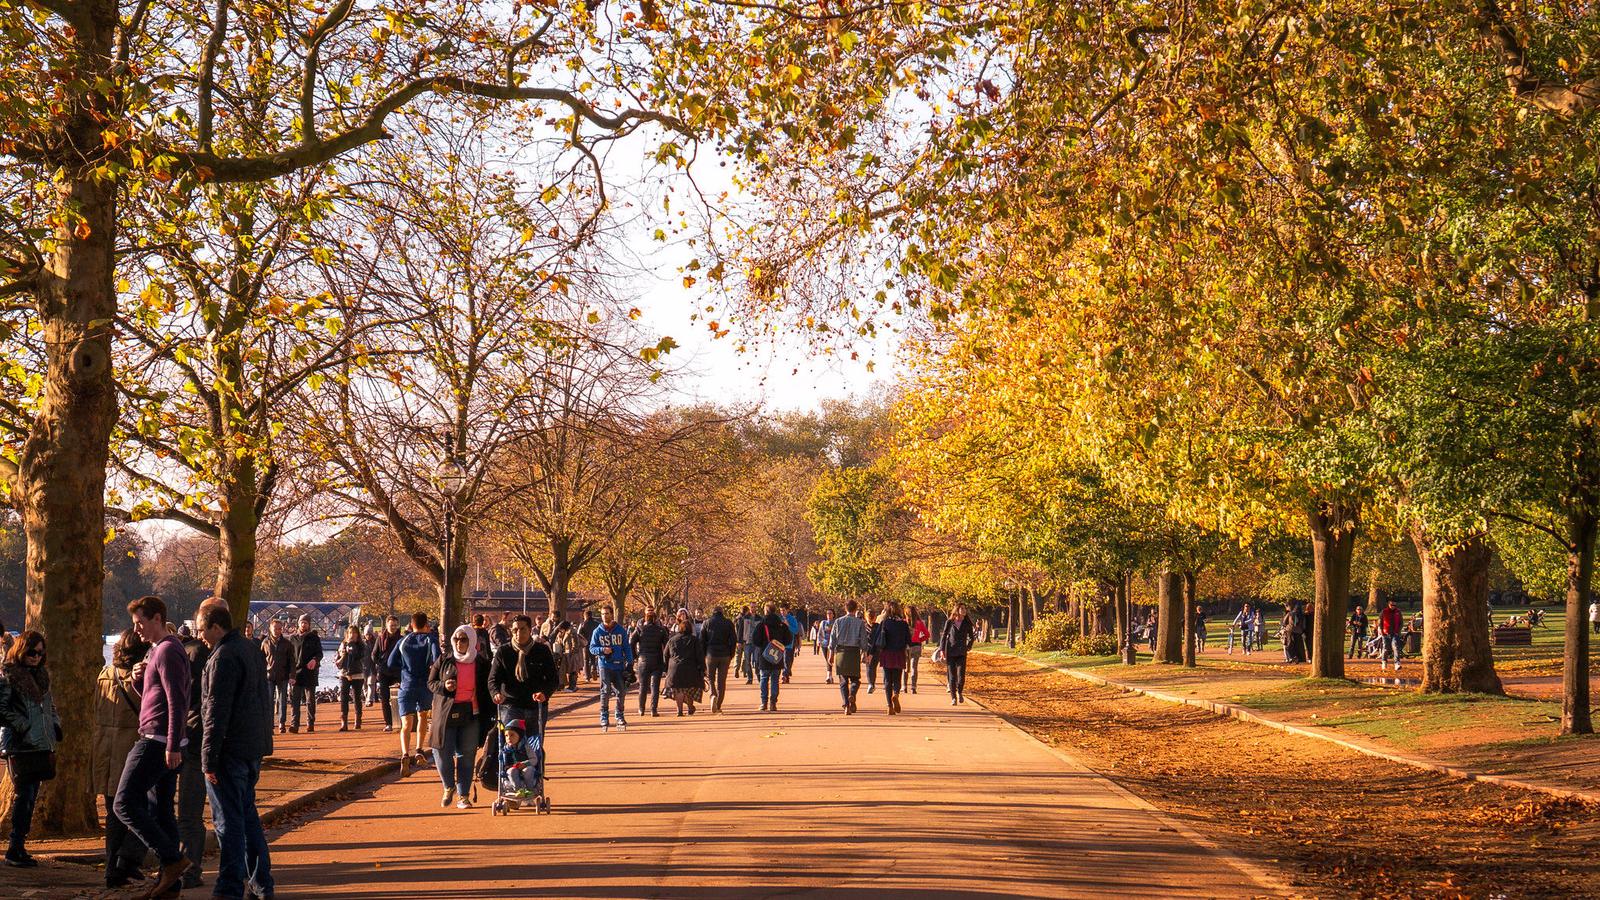 London residents take a stroll in Hyde Park on an autumn day. A new study showed that taking walks in a park setting may be much more beneficial than a similar walk on a crowded city street.